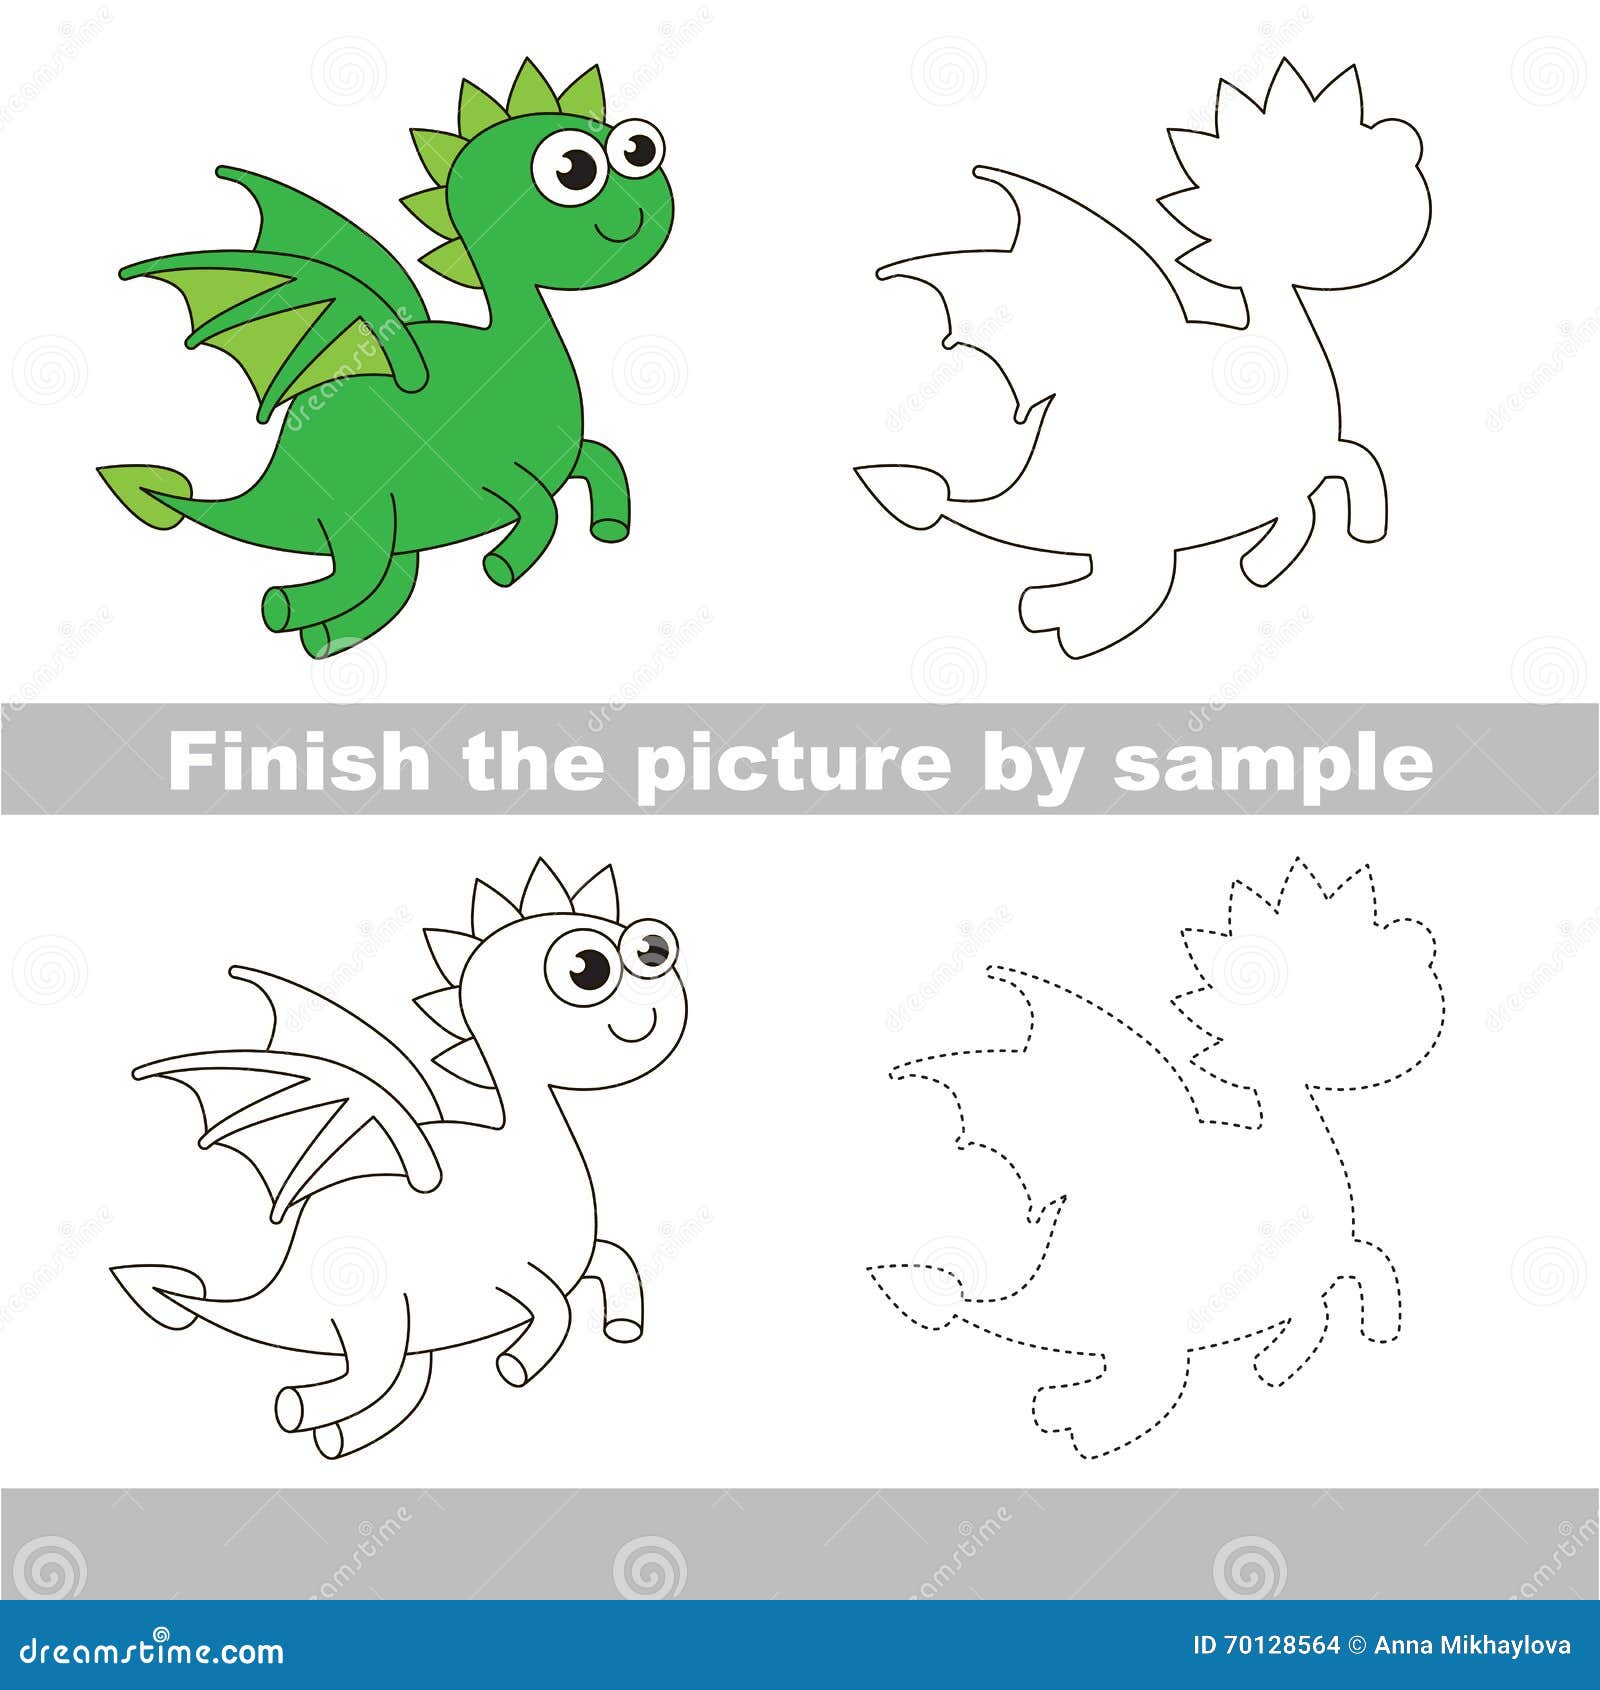 How to Draw a Kawaii Dragon (Easy Beginner Guide)